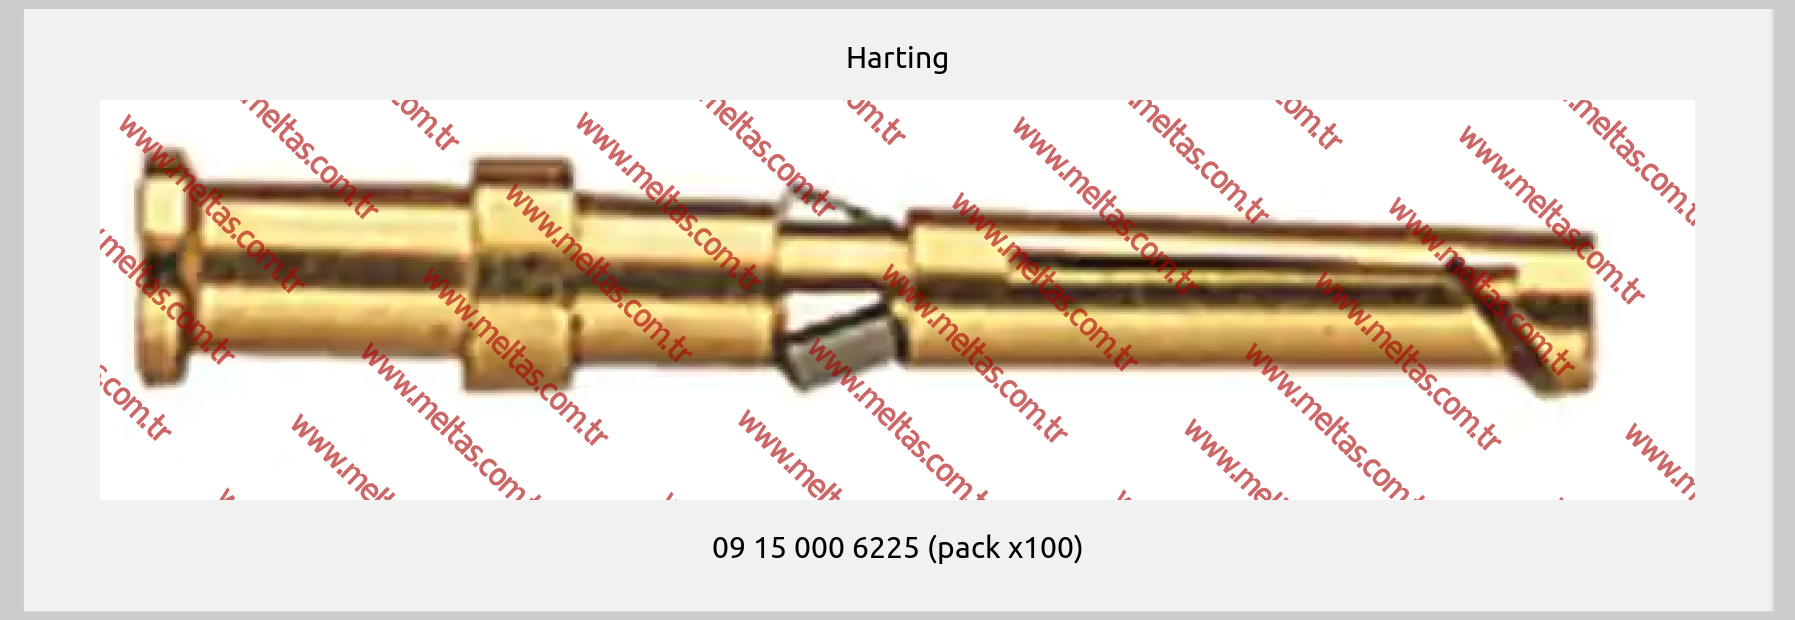 Harting-09 15 000 6225 (pack x100)